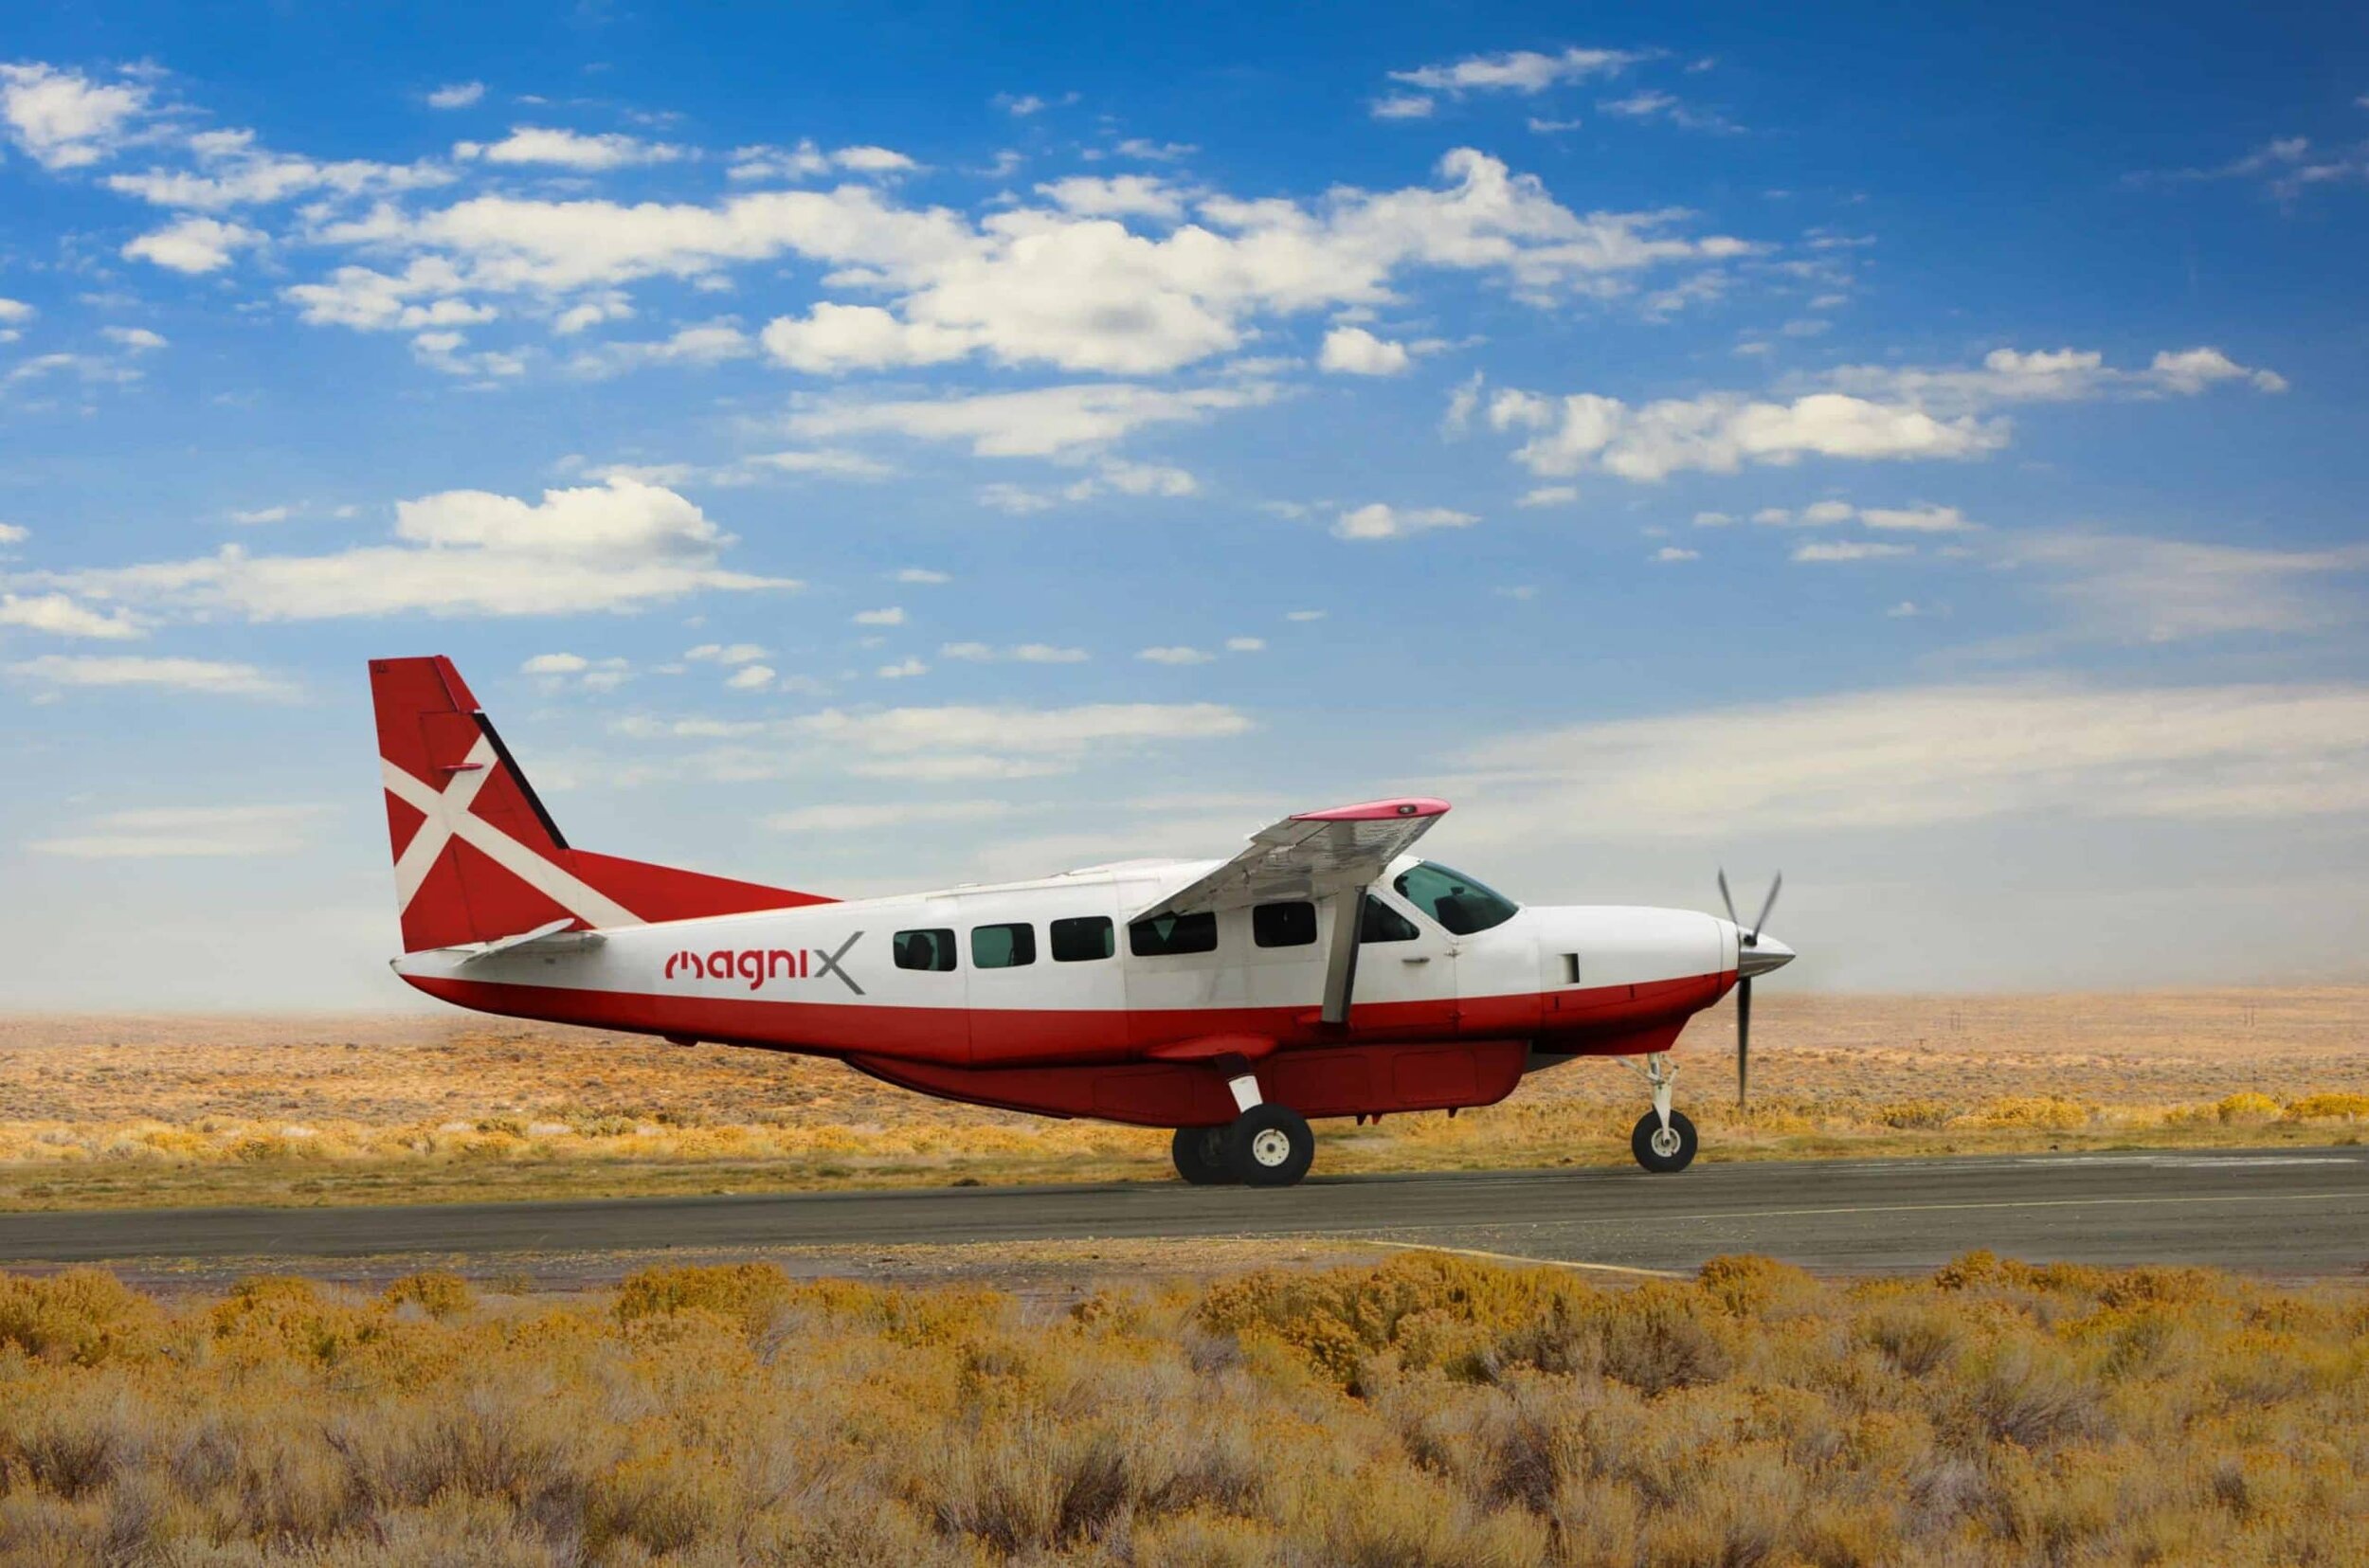 In May of 2020, magniX started flying the largest all-electric commercial aircraft, the eCaravan, a retrofitted Cessna 208B Grand Caravan. Courtesy: magniX